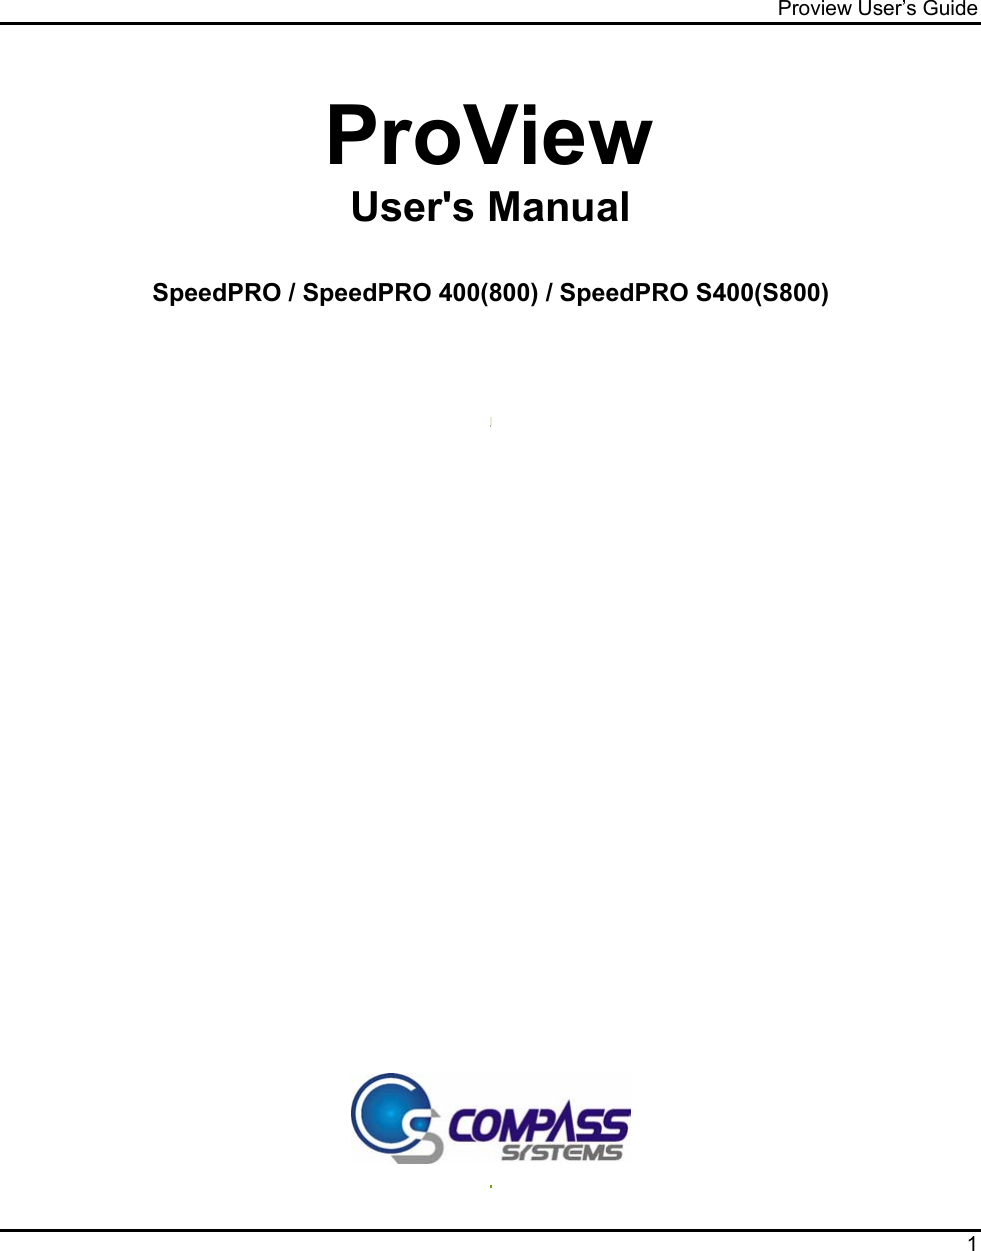 Proview User’s Guide  1         ProView User&apos;s Manual  SpeedPRO / SpeedPRO 400(800) / SpeedPRO S400(S800)                                   